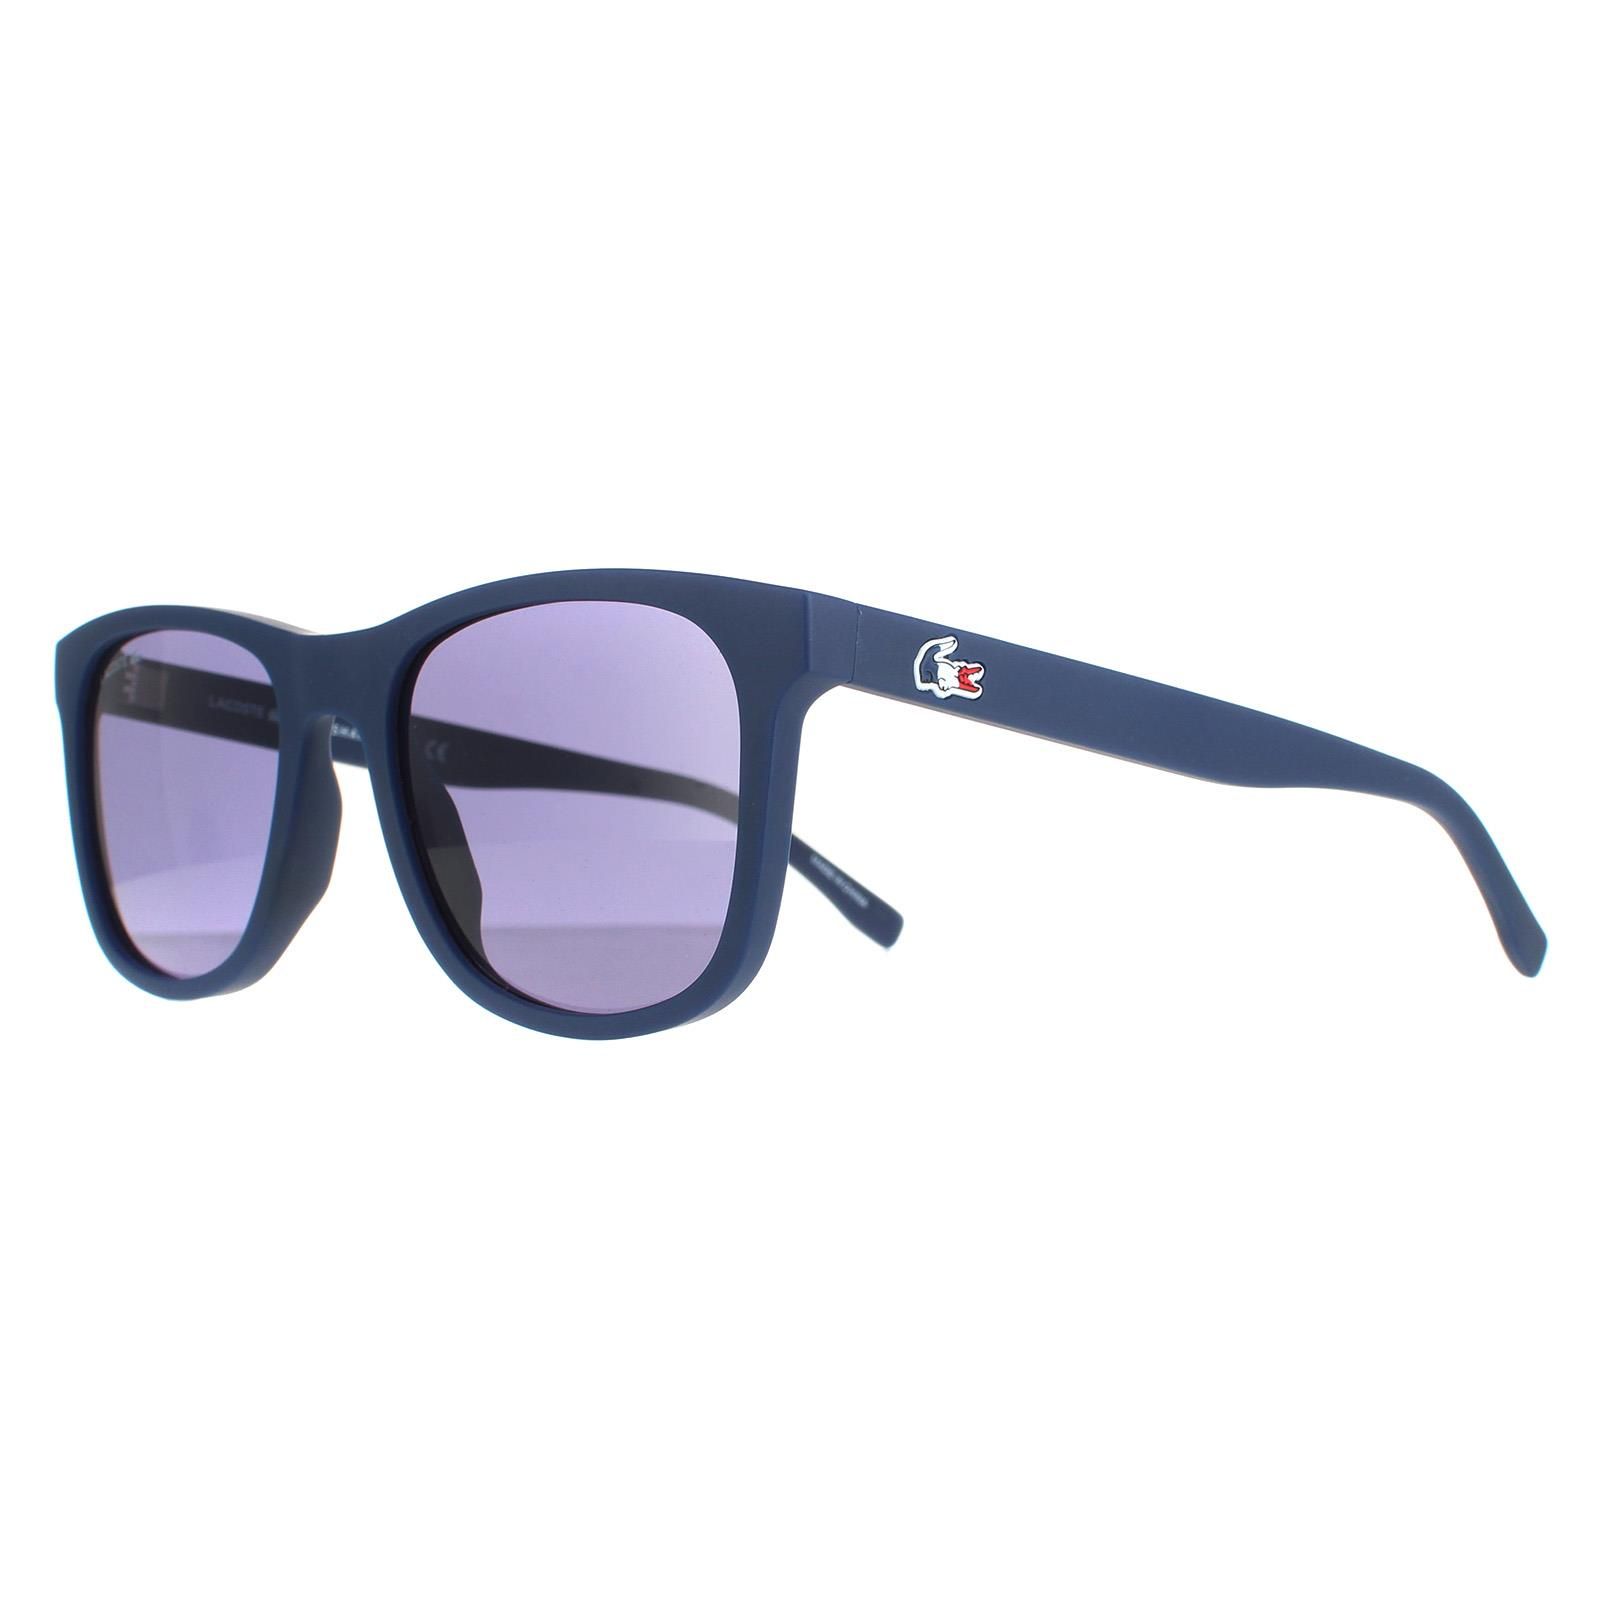 Lacoste Rectangle Unisex Blue France Blue L929SEOG Sunglasses are a classic rectangle style crafted from lightweight acetate. The iconic Lacoste logo features on the slender temples for brand authenticity.